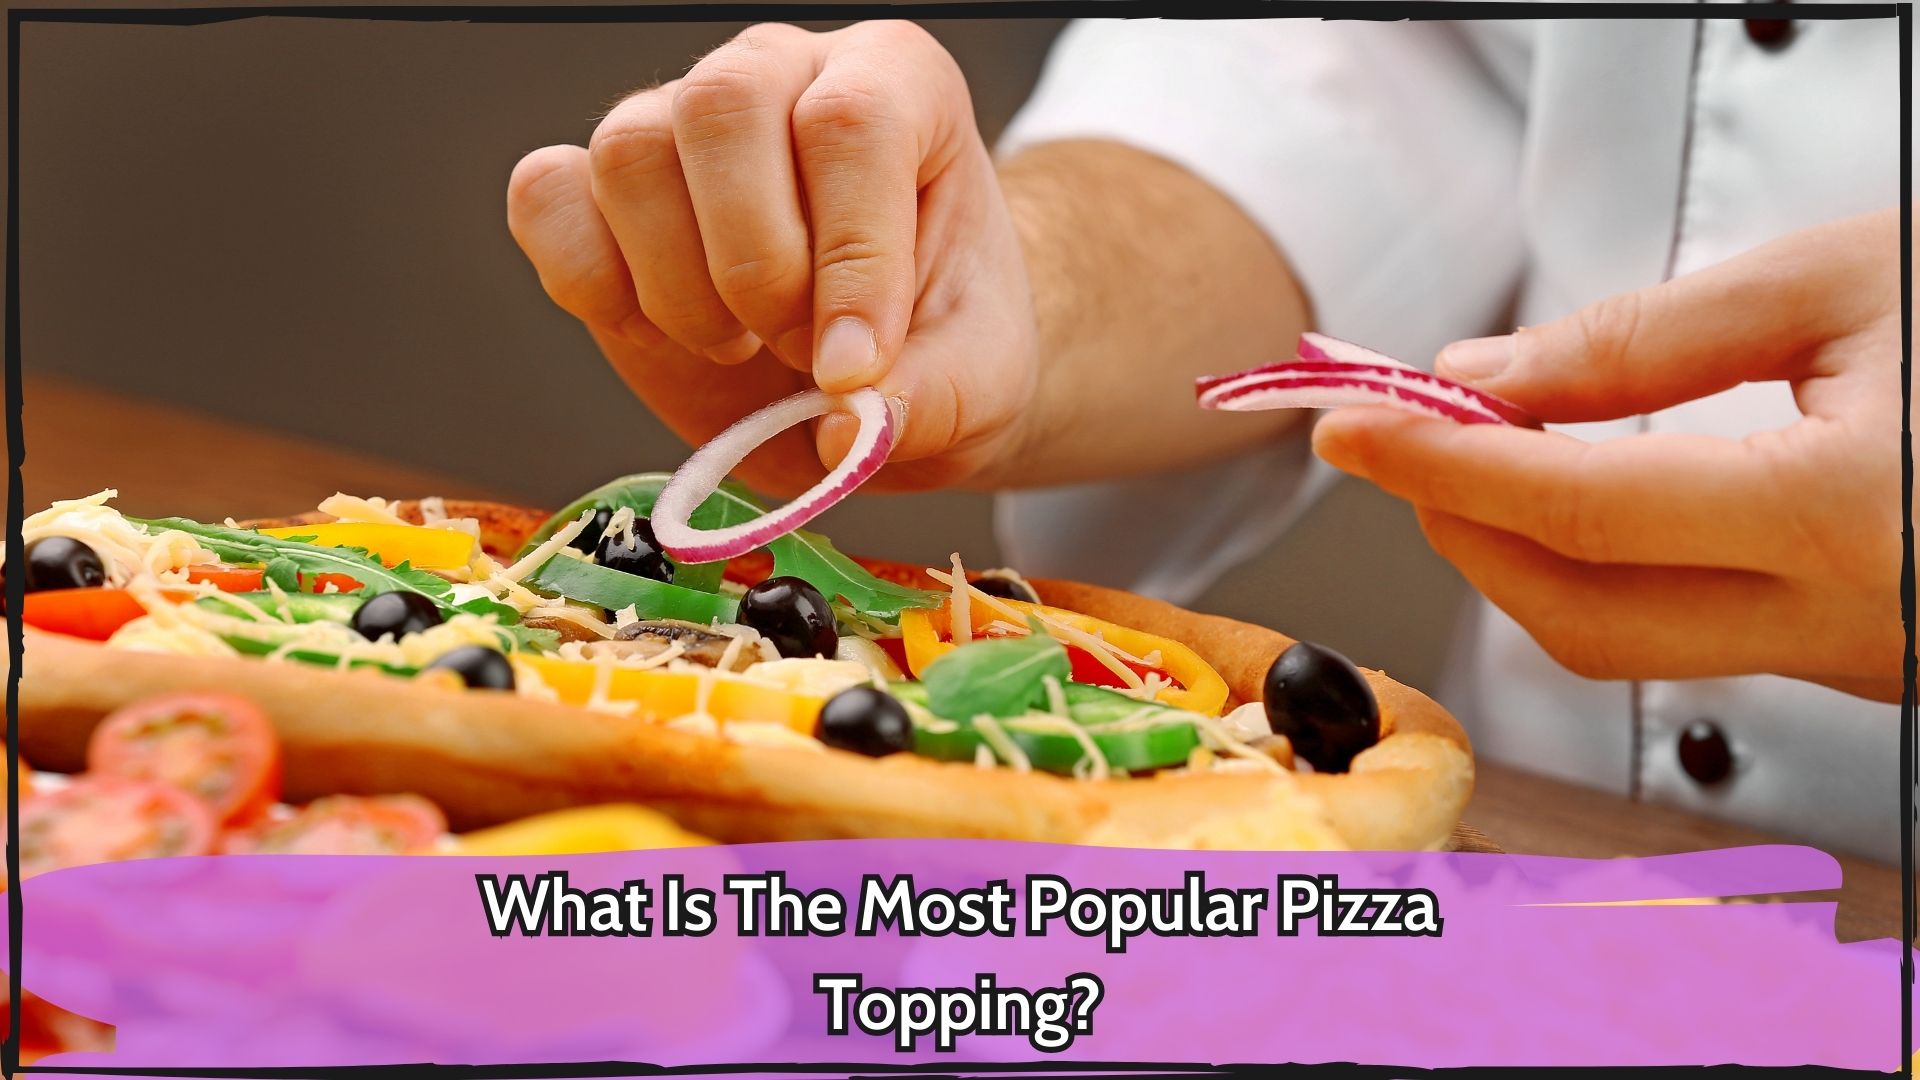 What Is The Most Popular Pizza Topping?